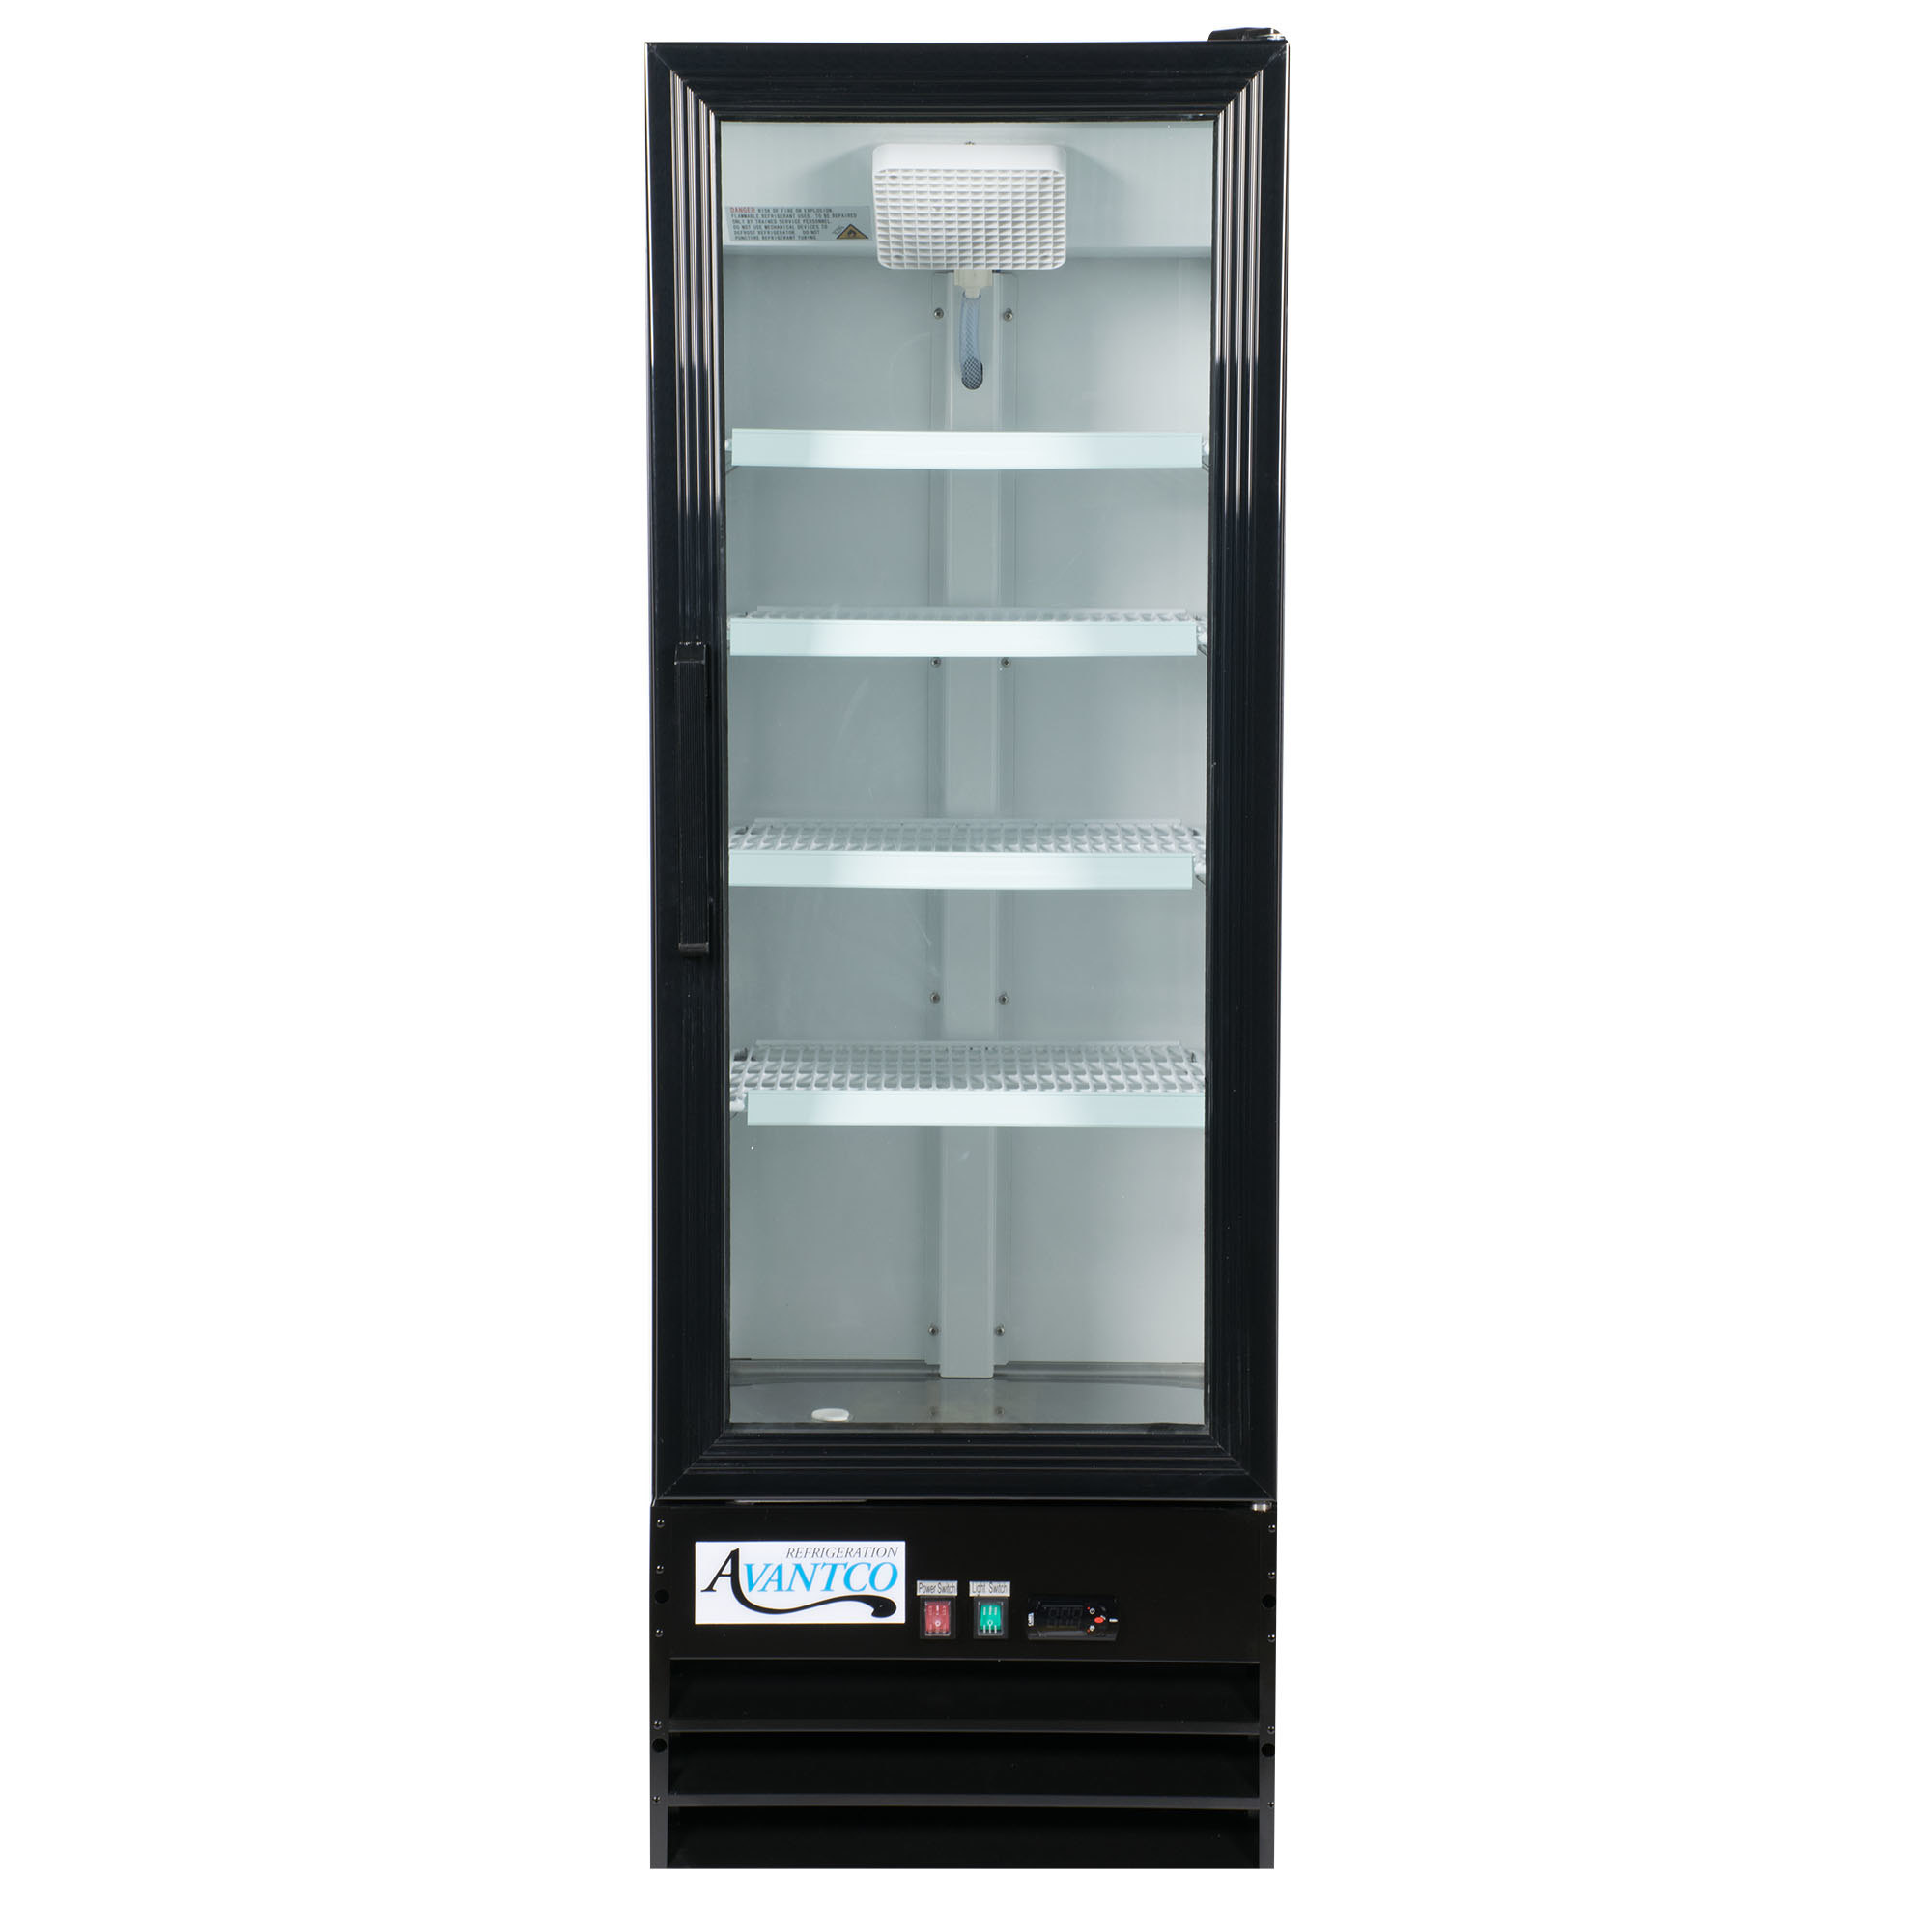 Refrigerator Glass Door Display  www.Raphaels.com - Call to place your rental order today! 858-689-7368 - www.raphaels.com